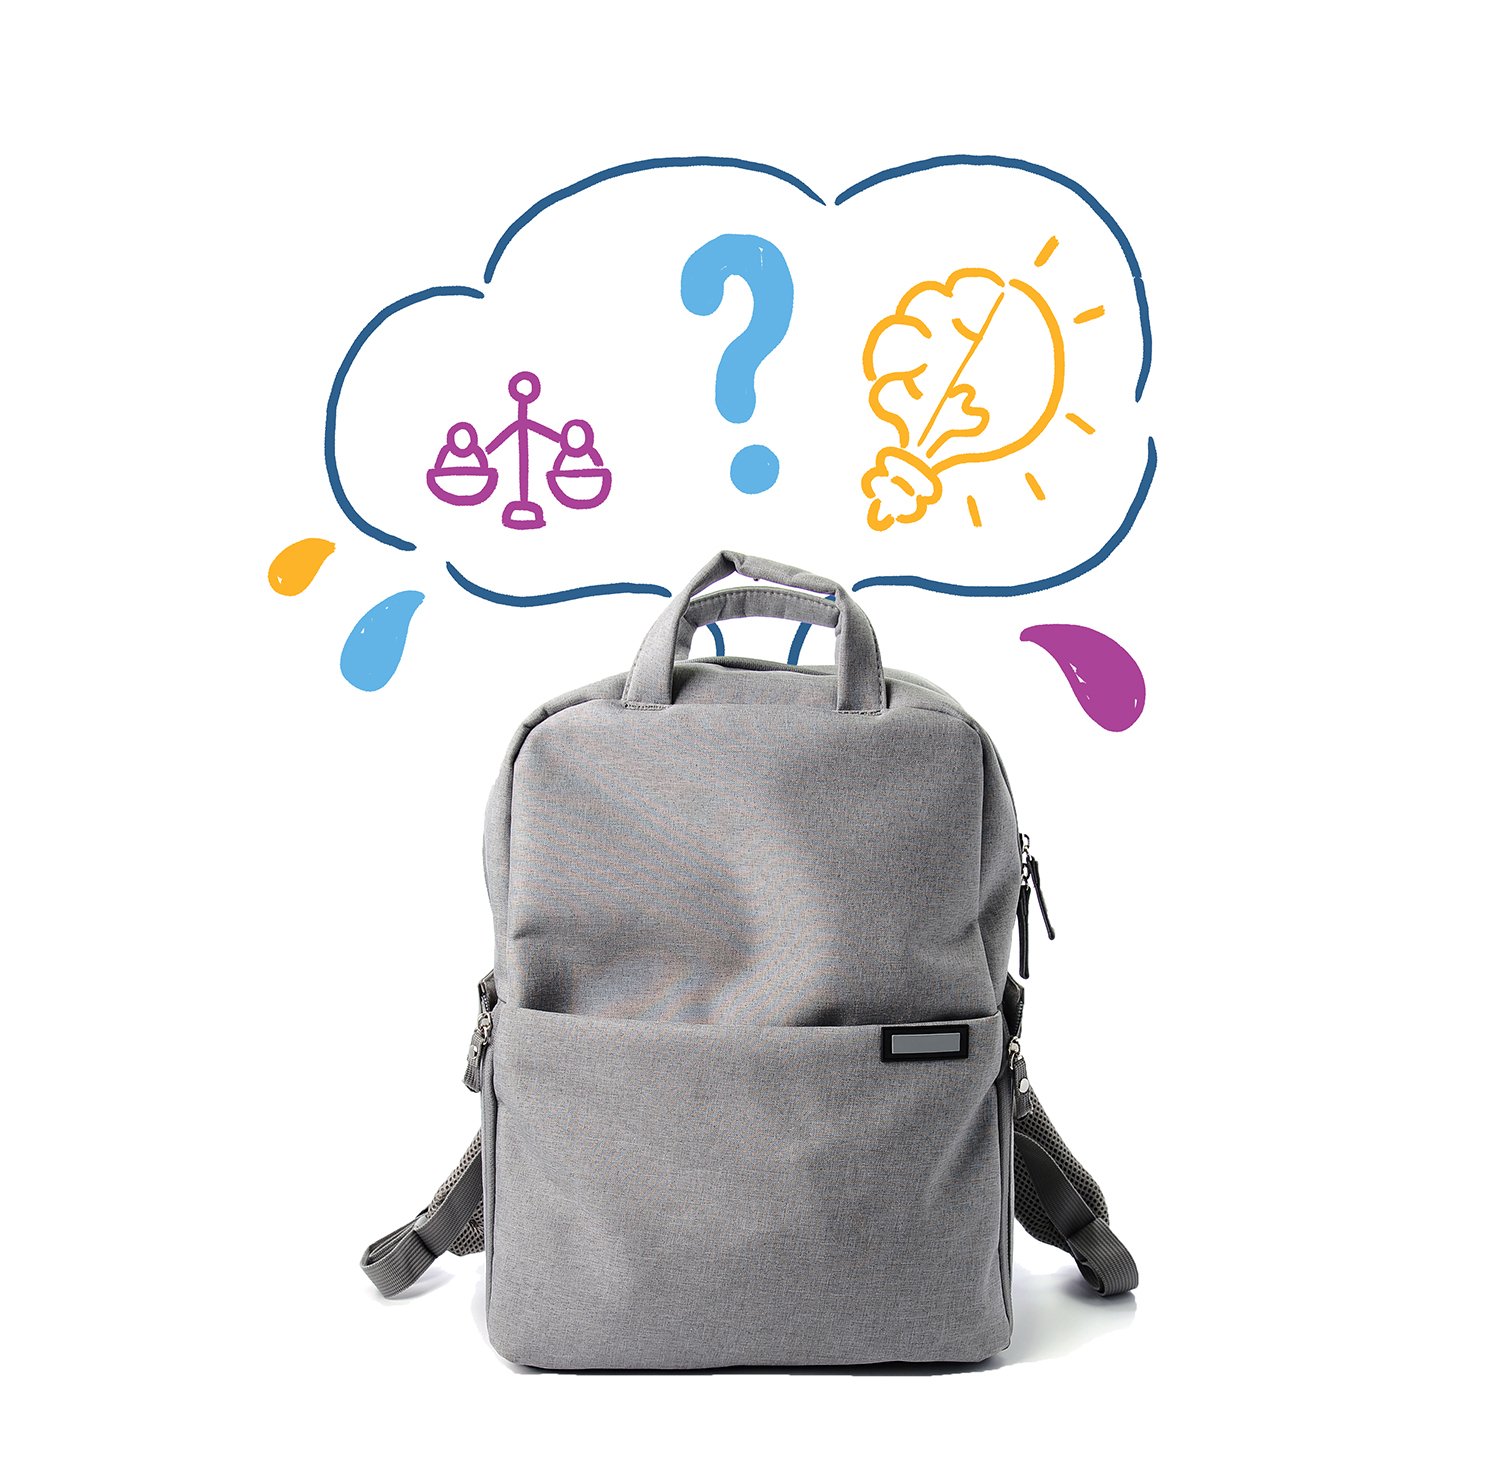 Picture of a gray backpack with sketched symbols of a scale, question mark, and lightbulb coming out of the top.